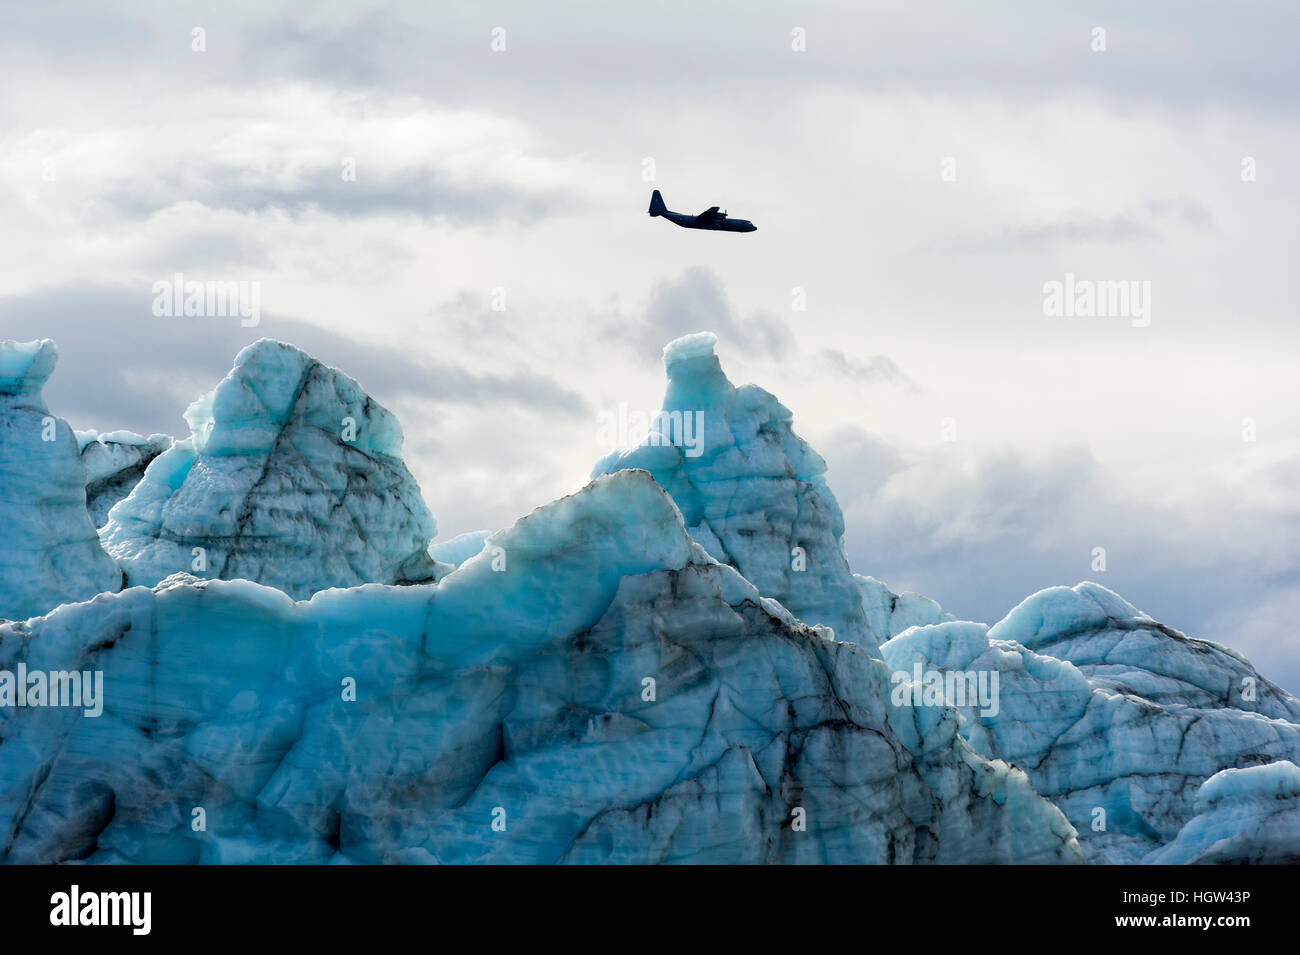 An airforce Hercules aircraft flying over the Greenland Ice Sheet. Stock Photo